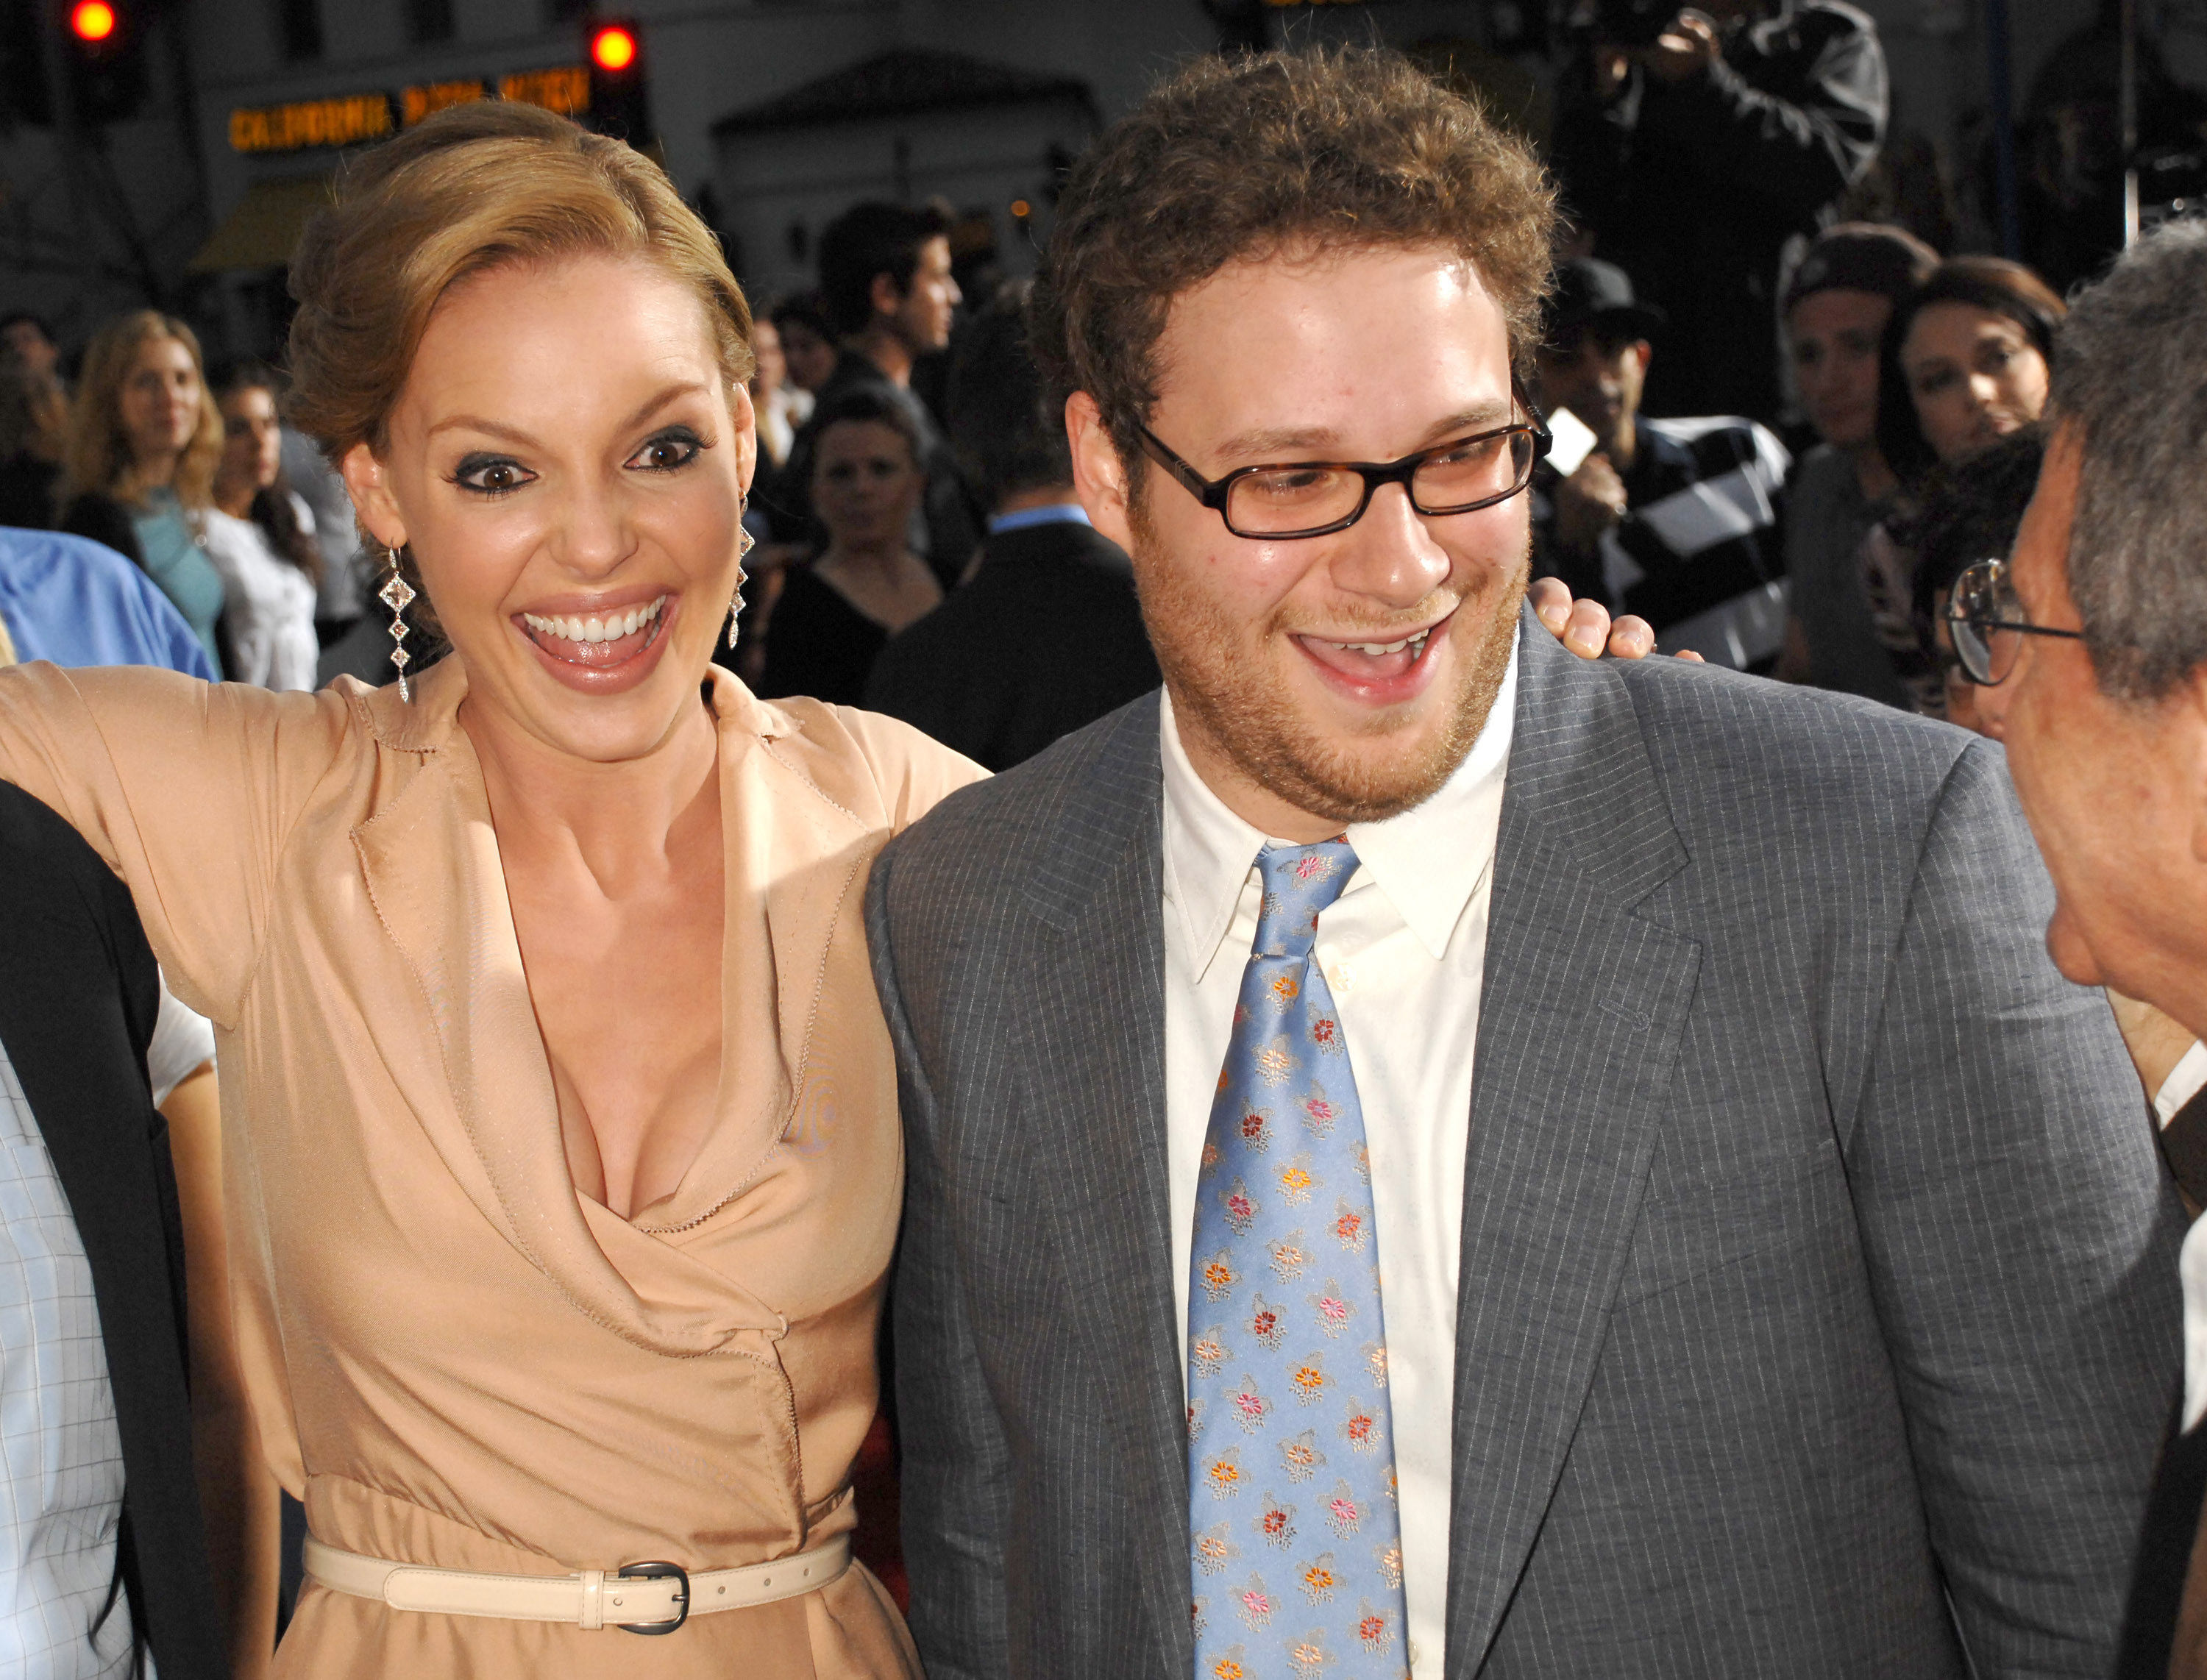 Katherine Heigl and Seth Rogen at the premier of the movie